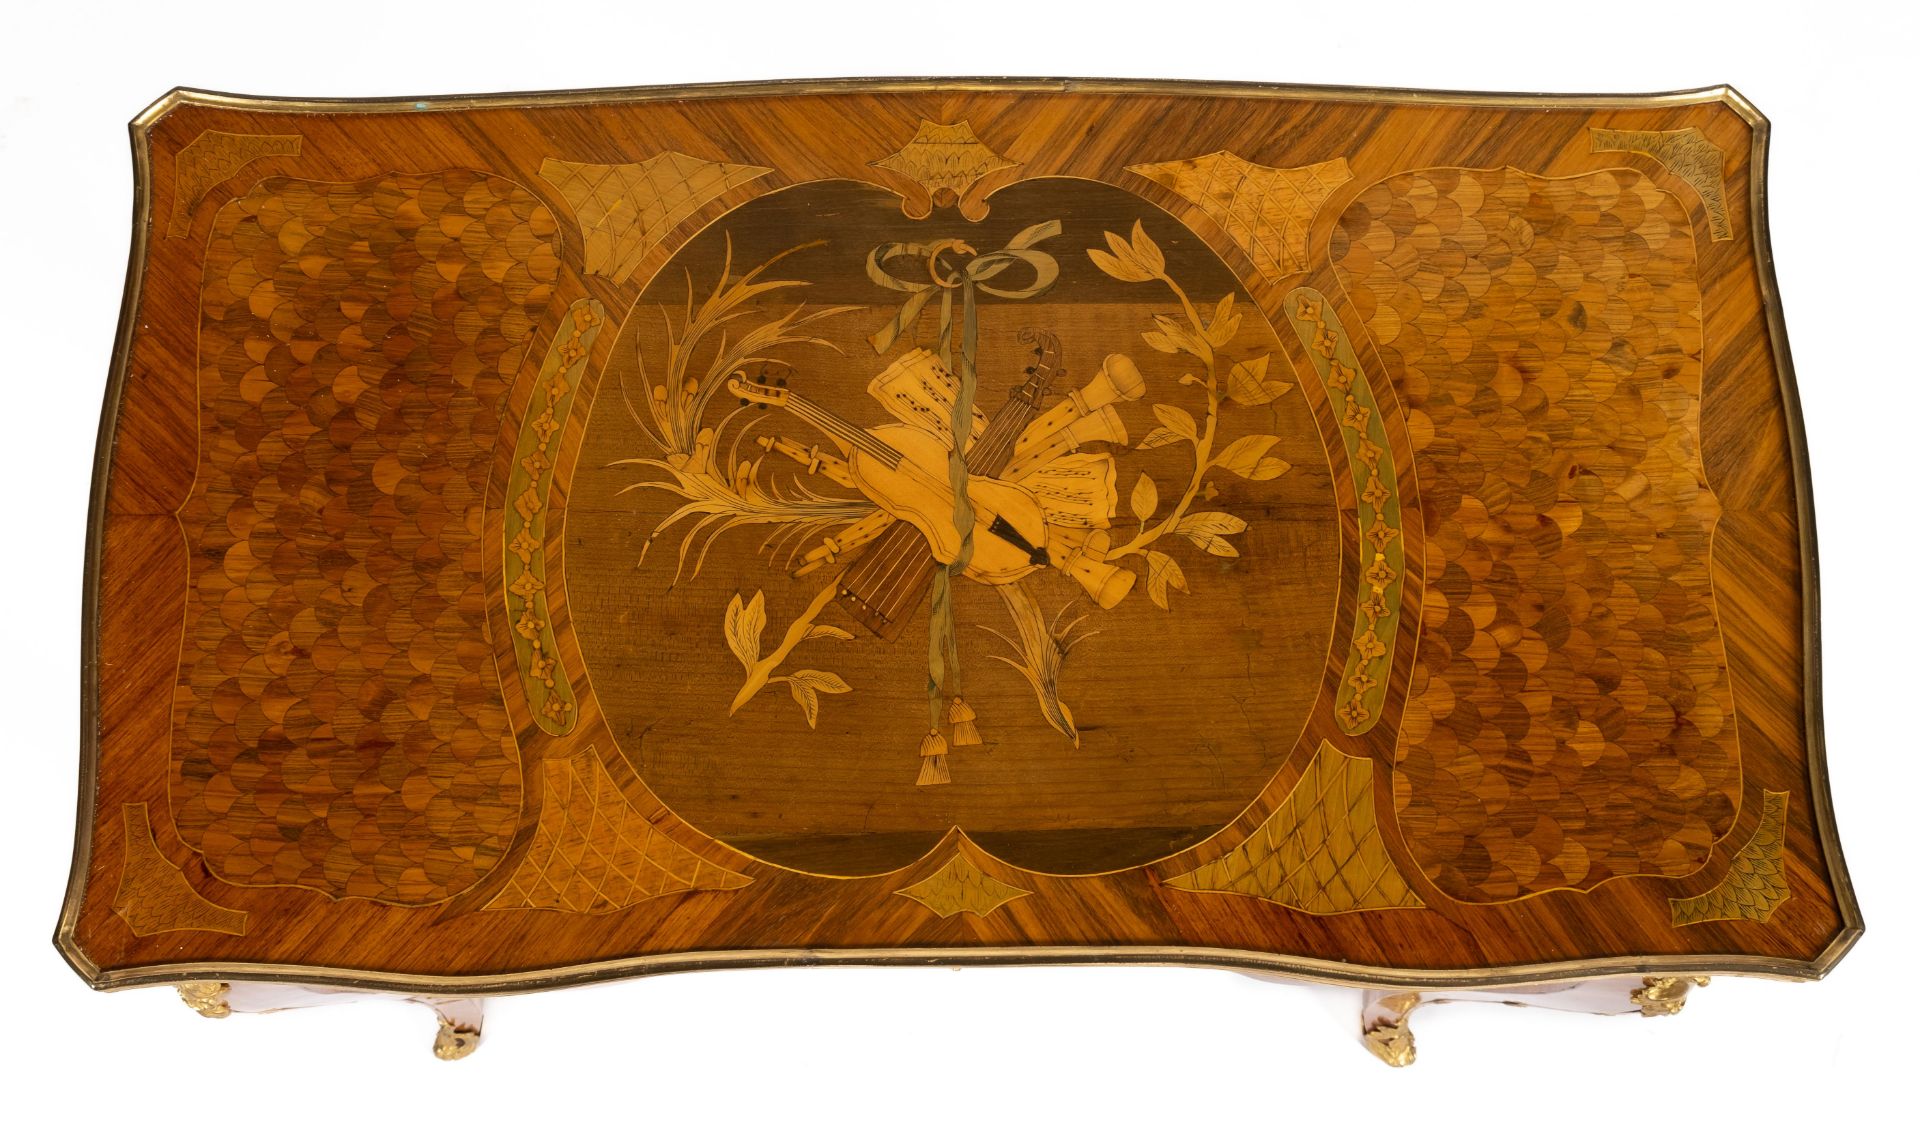 A Louis XV ormolu-mounted kingwood, sycamore and fruitwood marquetry table de salon - Image 4 of 4